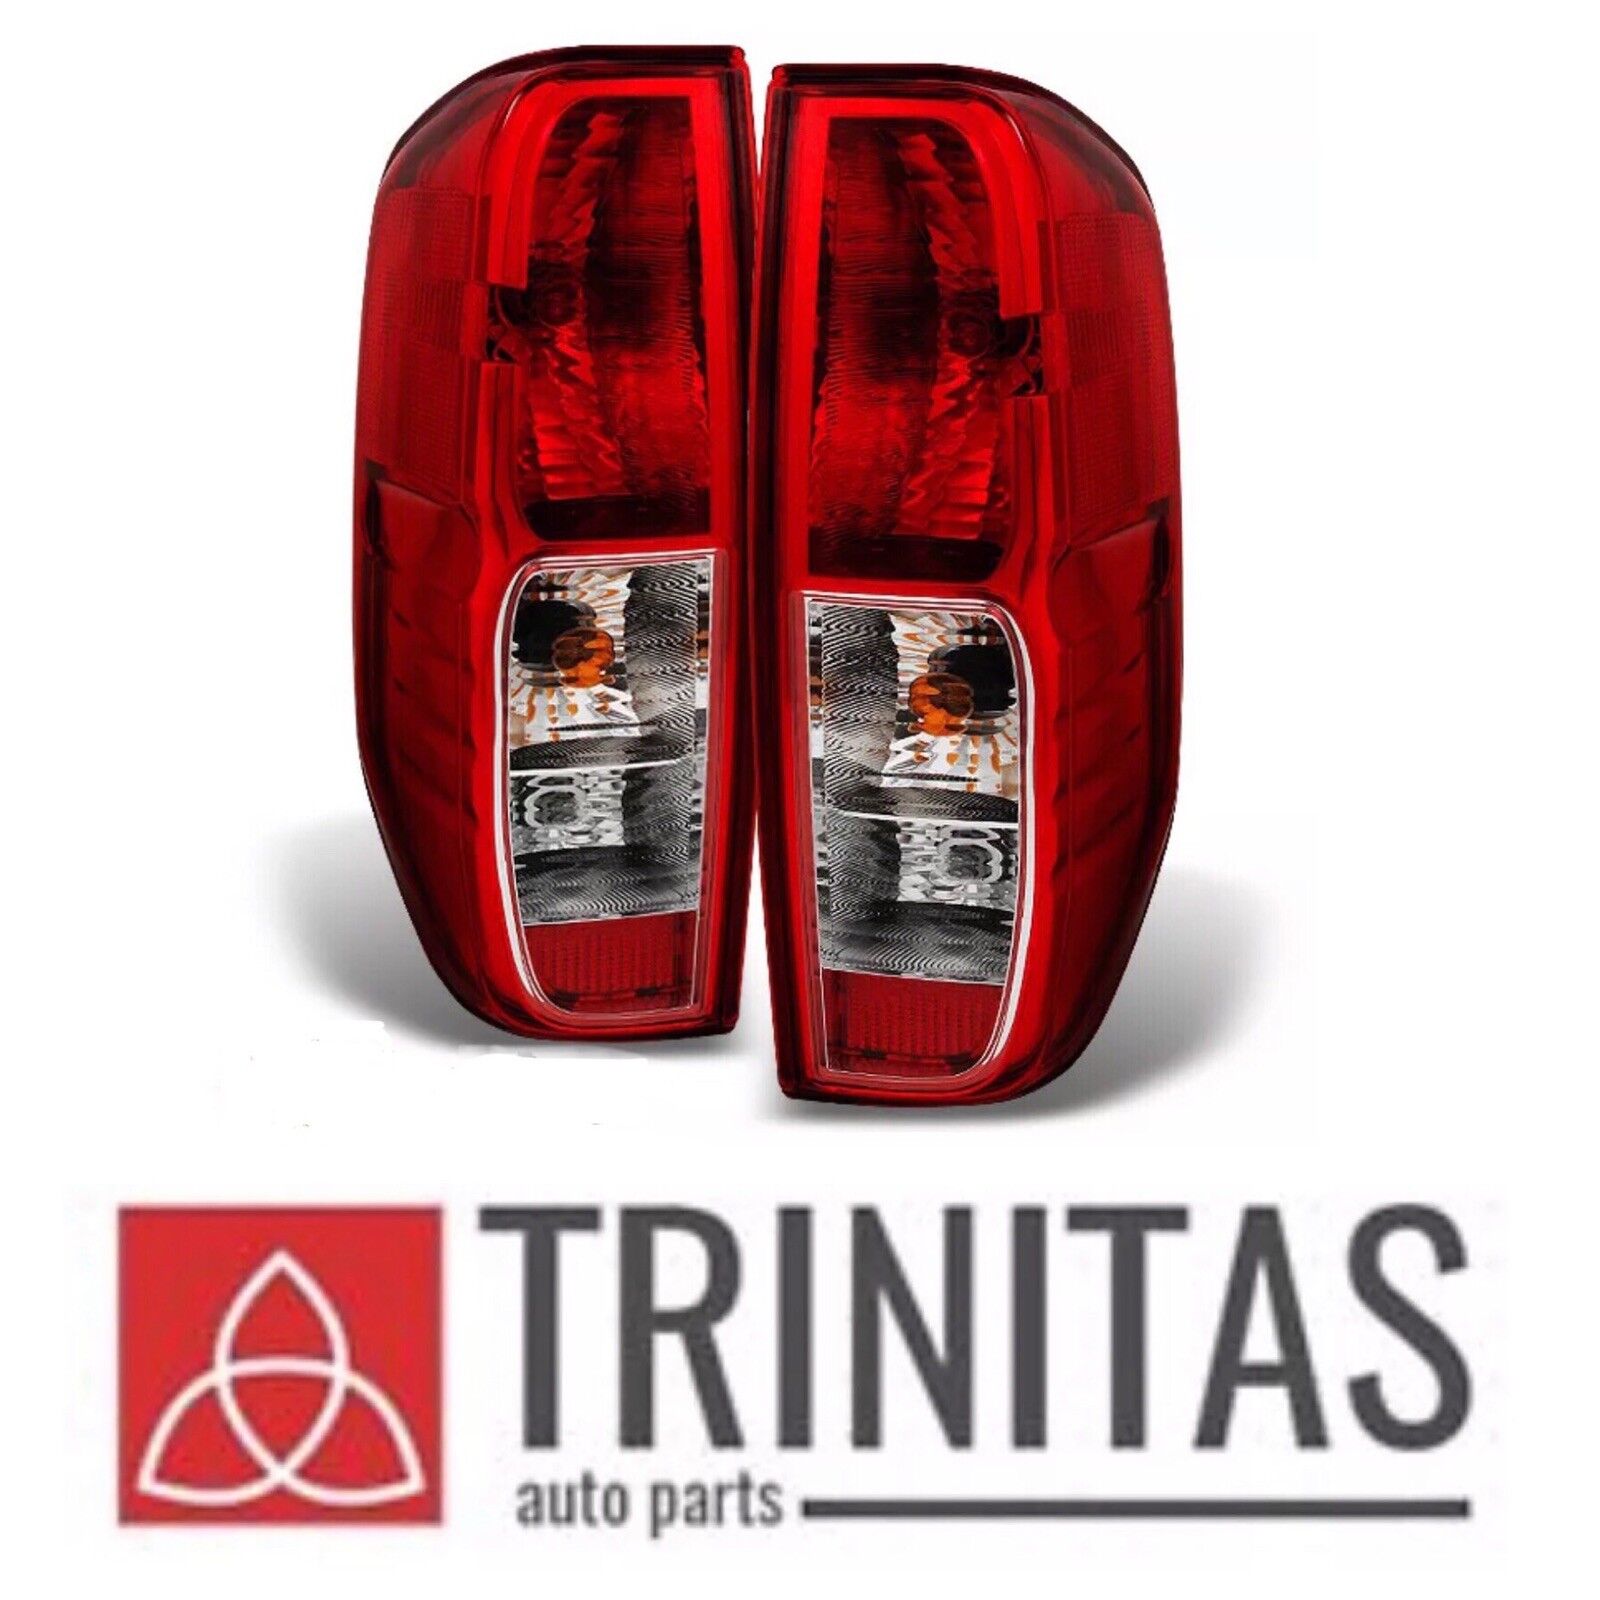 For Set 2005-2014 Frontier 09-12 Equator Tail Lights Lamps Left+Eight